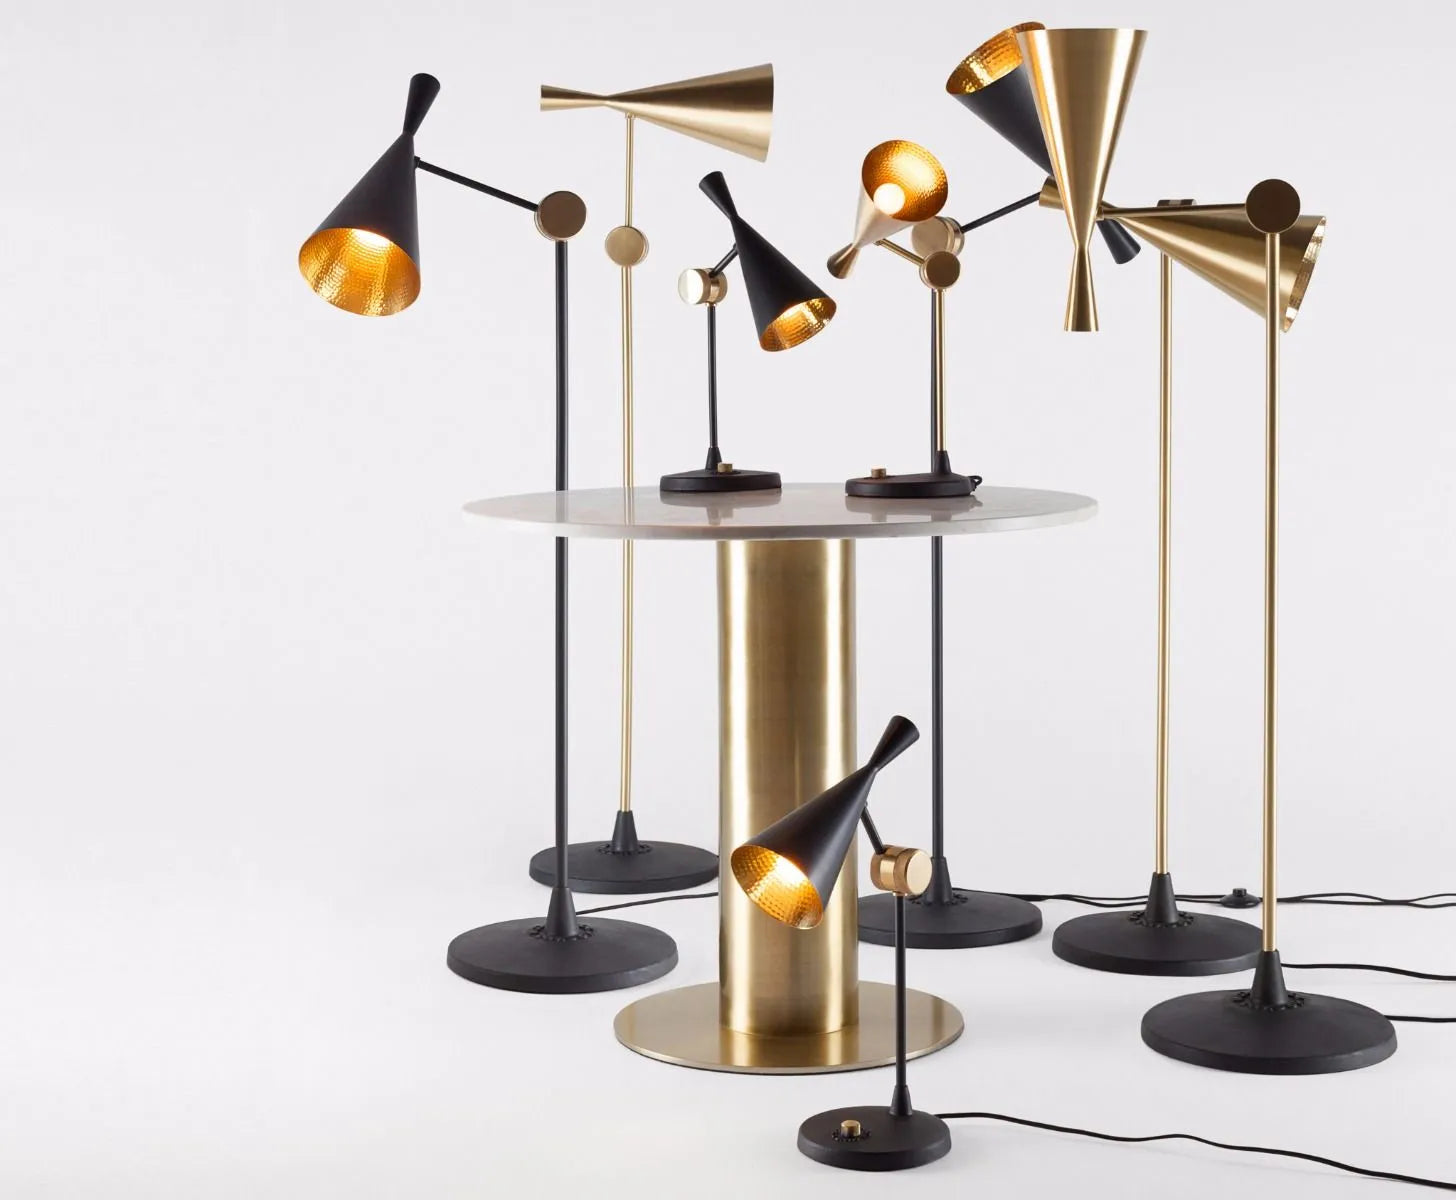 Fully Adjustable Modern table floor lamps with Indian touch of hammered brass texture